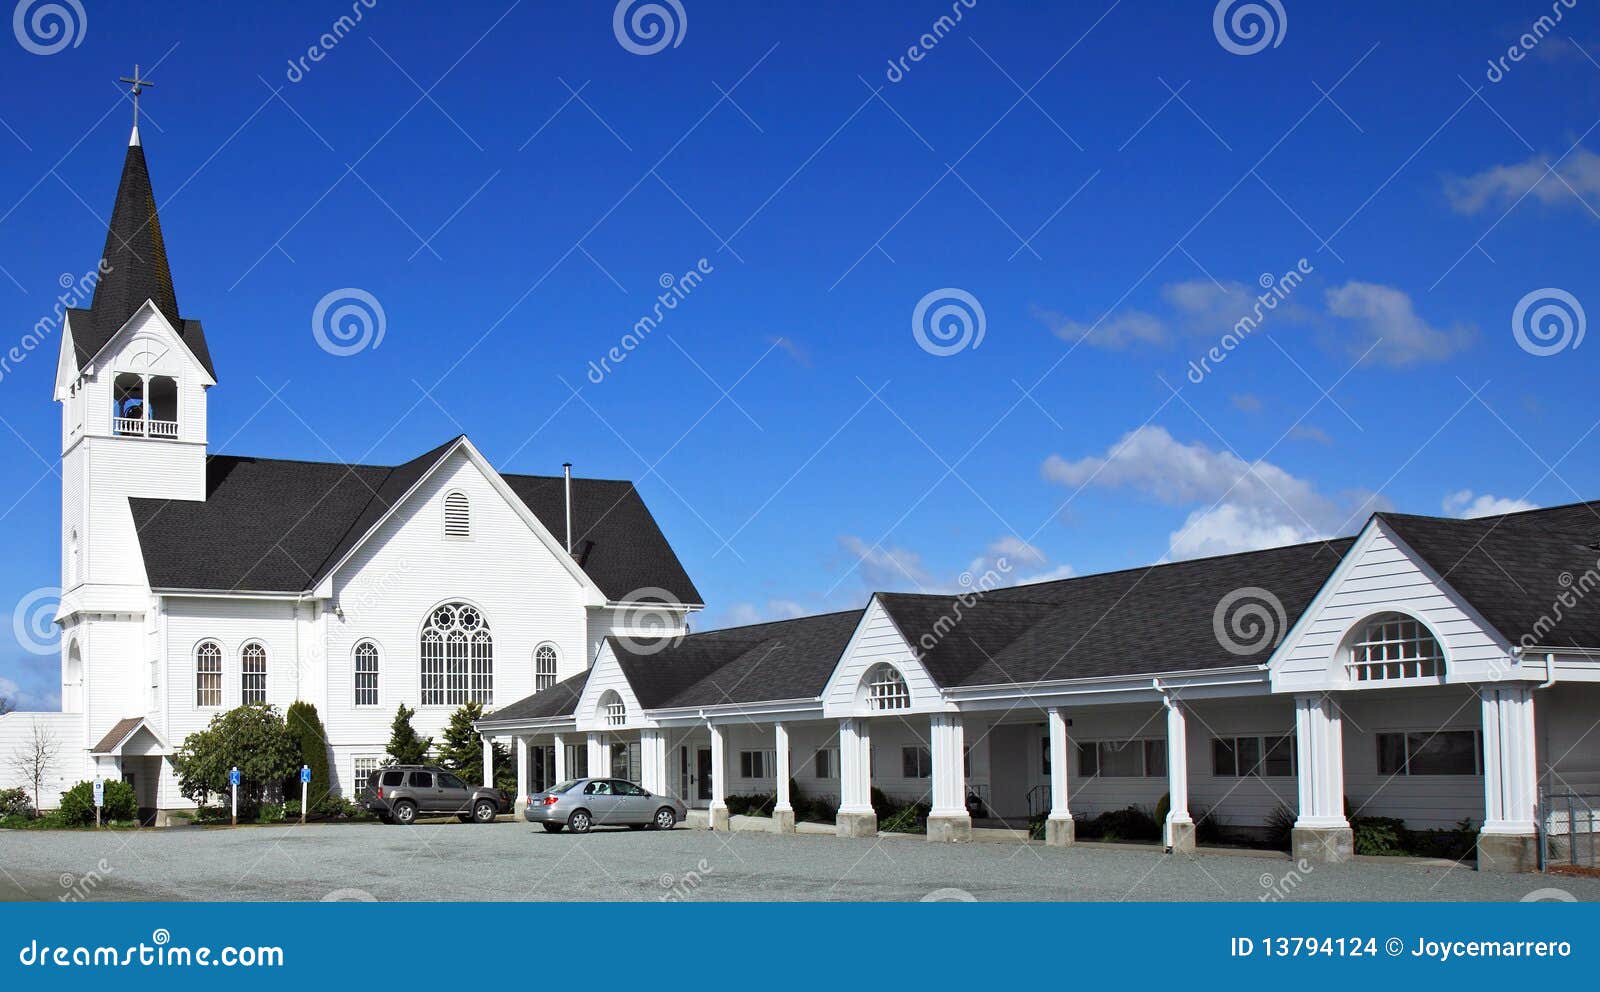 Premium Photo  Small church belfry white color chapel roof on